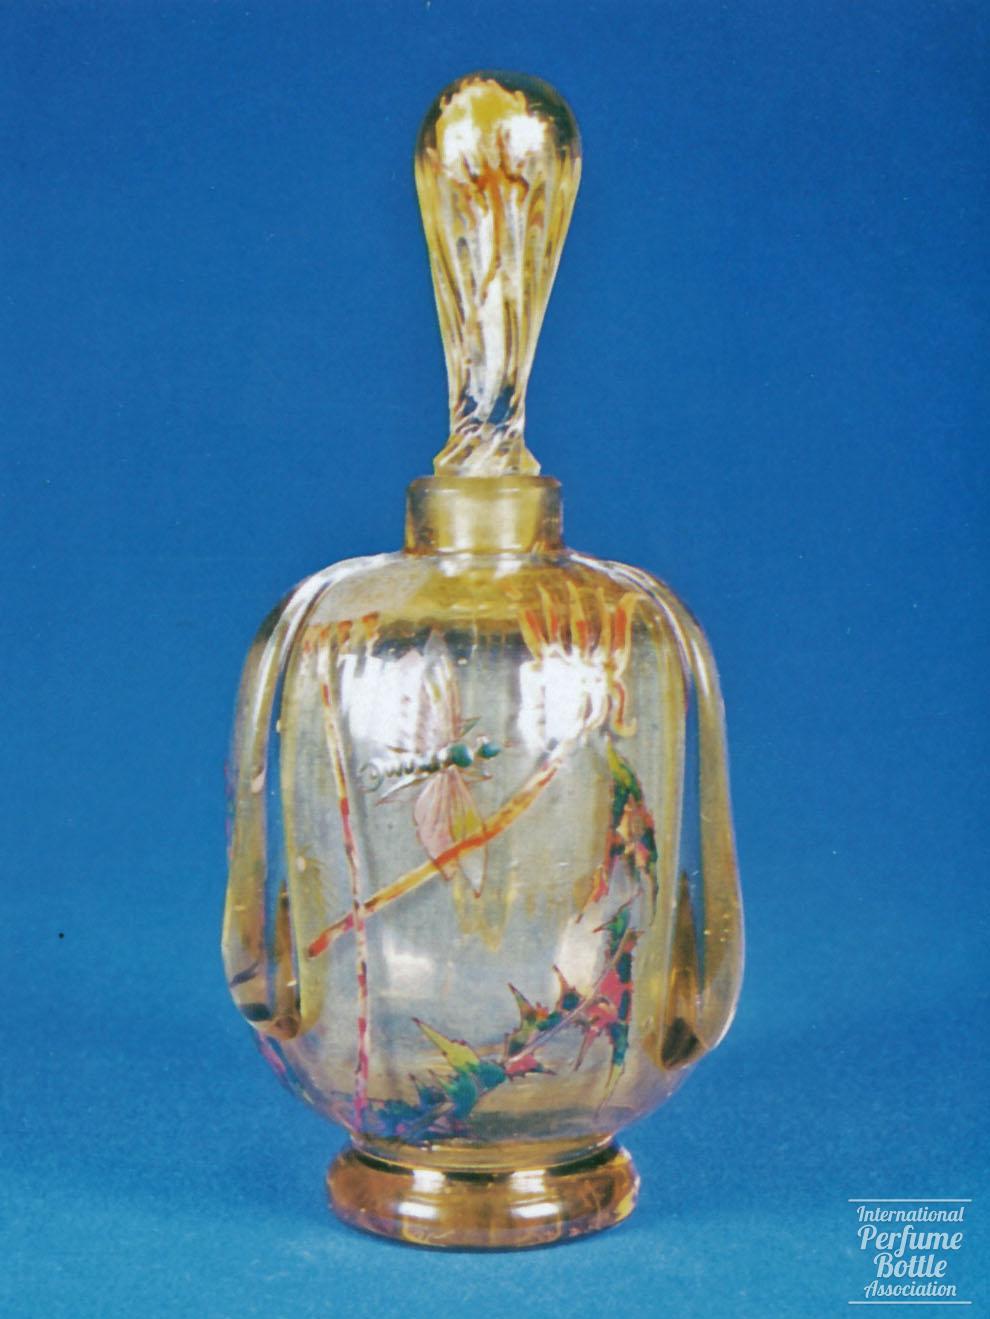 Yellow Dragonfly Bottle by Émile Gallé